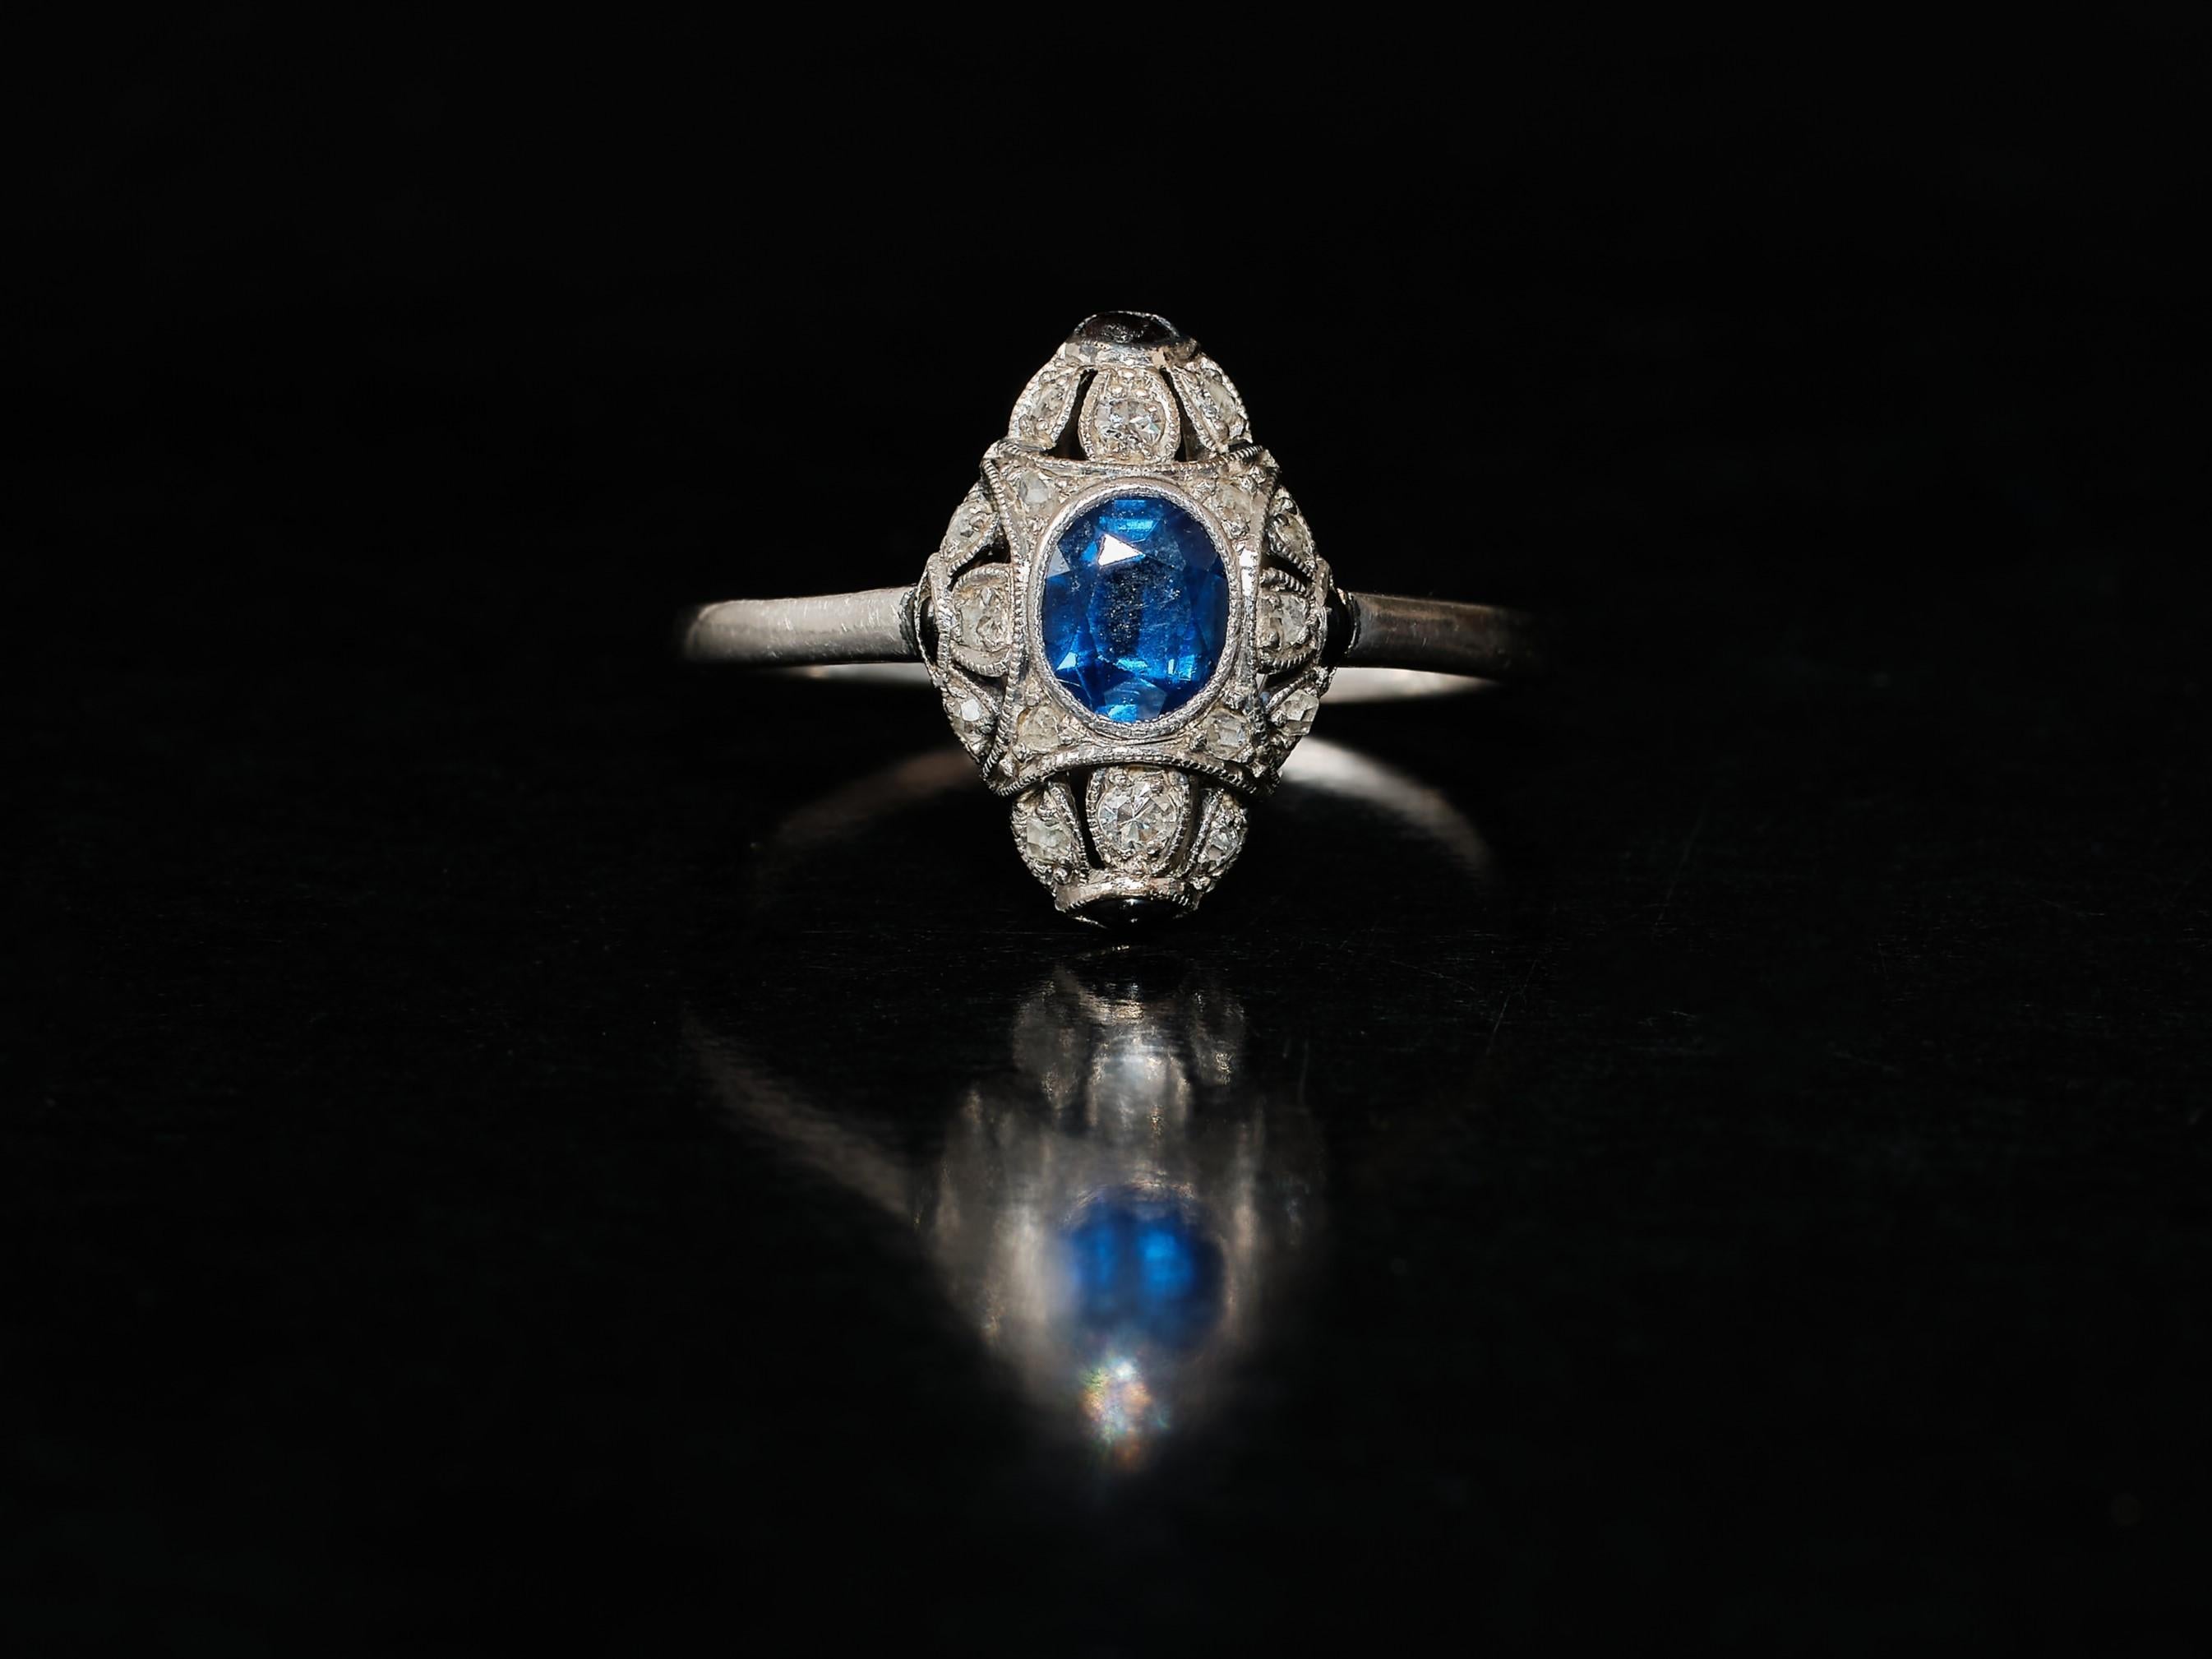 A very stylish antique sapphire ring from the Art Deco era. Small but oh so sweet. 1920s glamour! A lozenge shape frame centering a oval cut sapphire estimated to weigh approx. 0.39 ct. surrounded by 16 small diamonds, old and single cut.  The